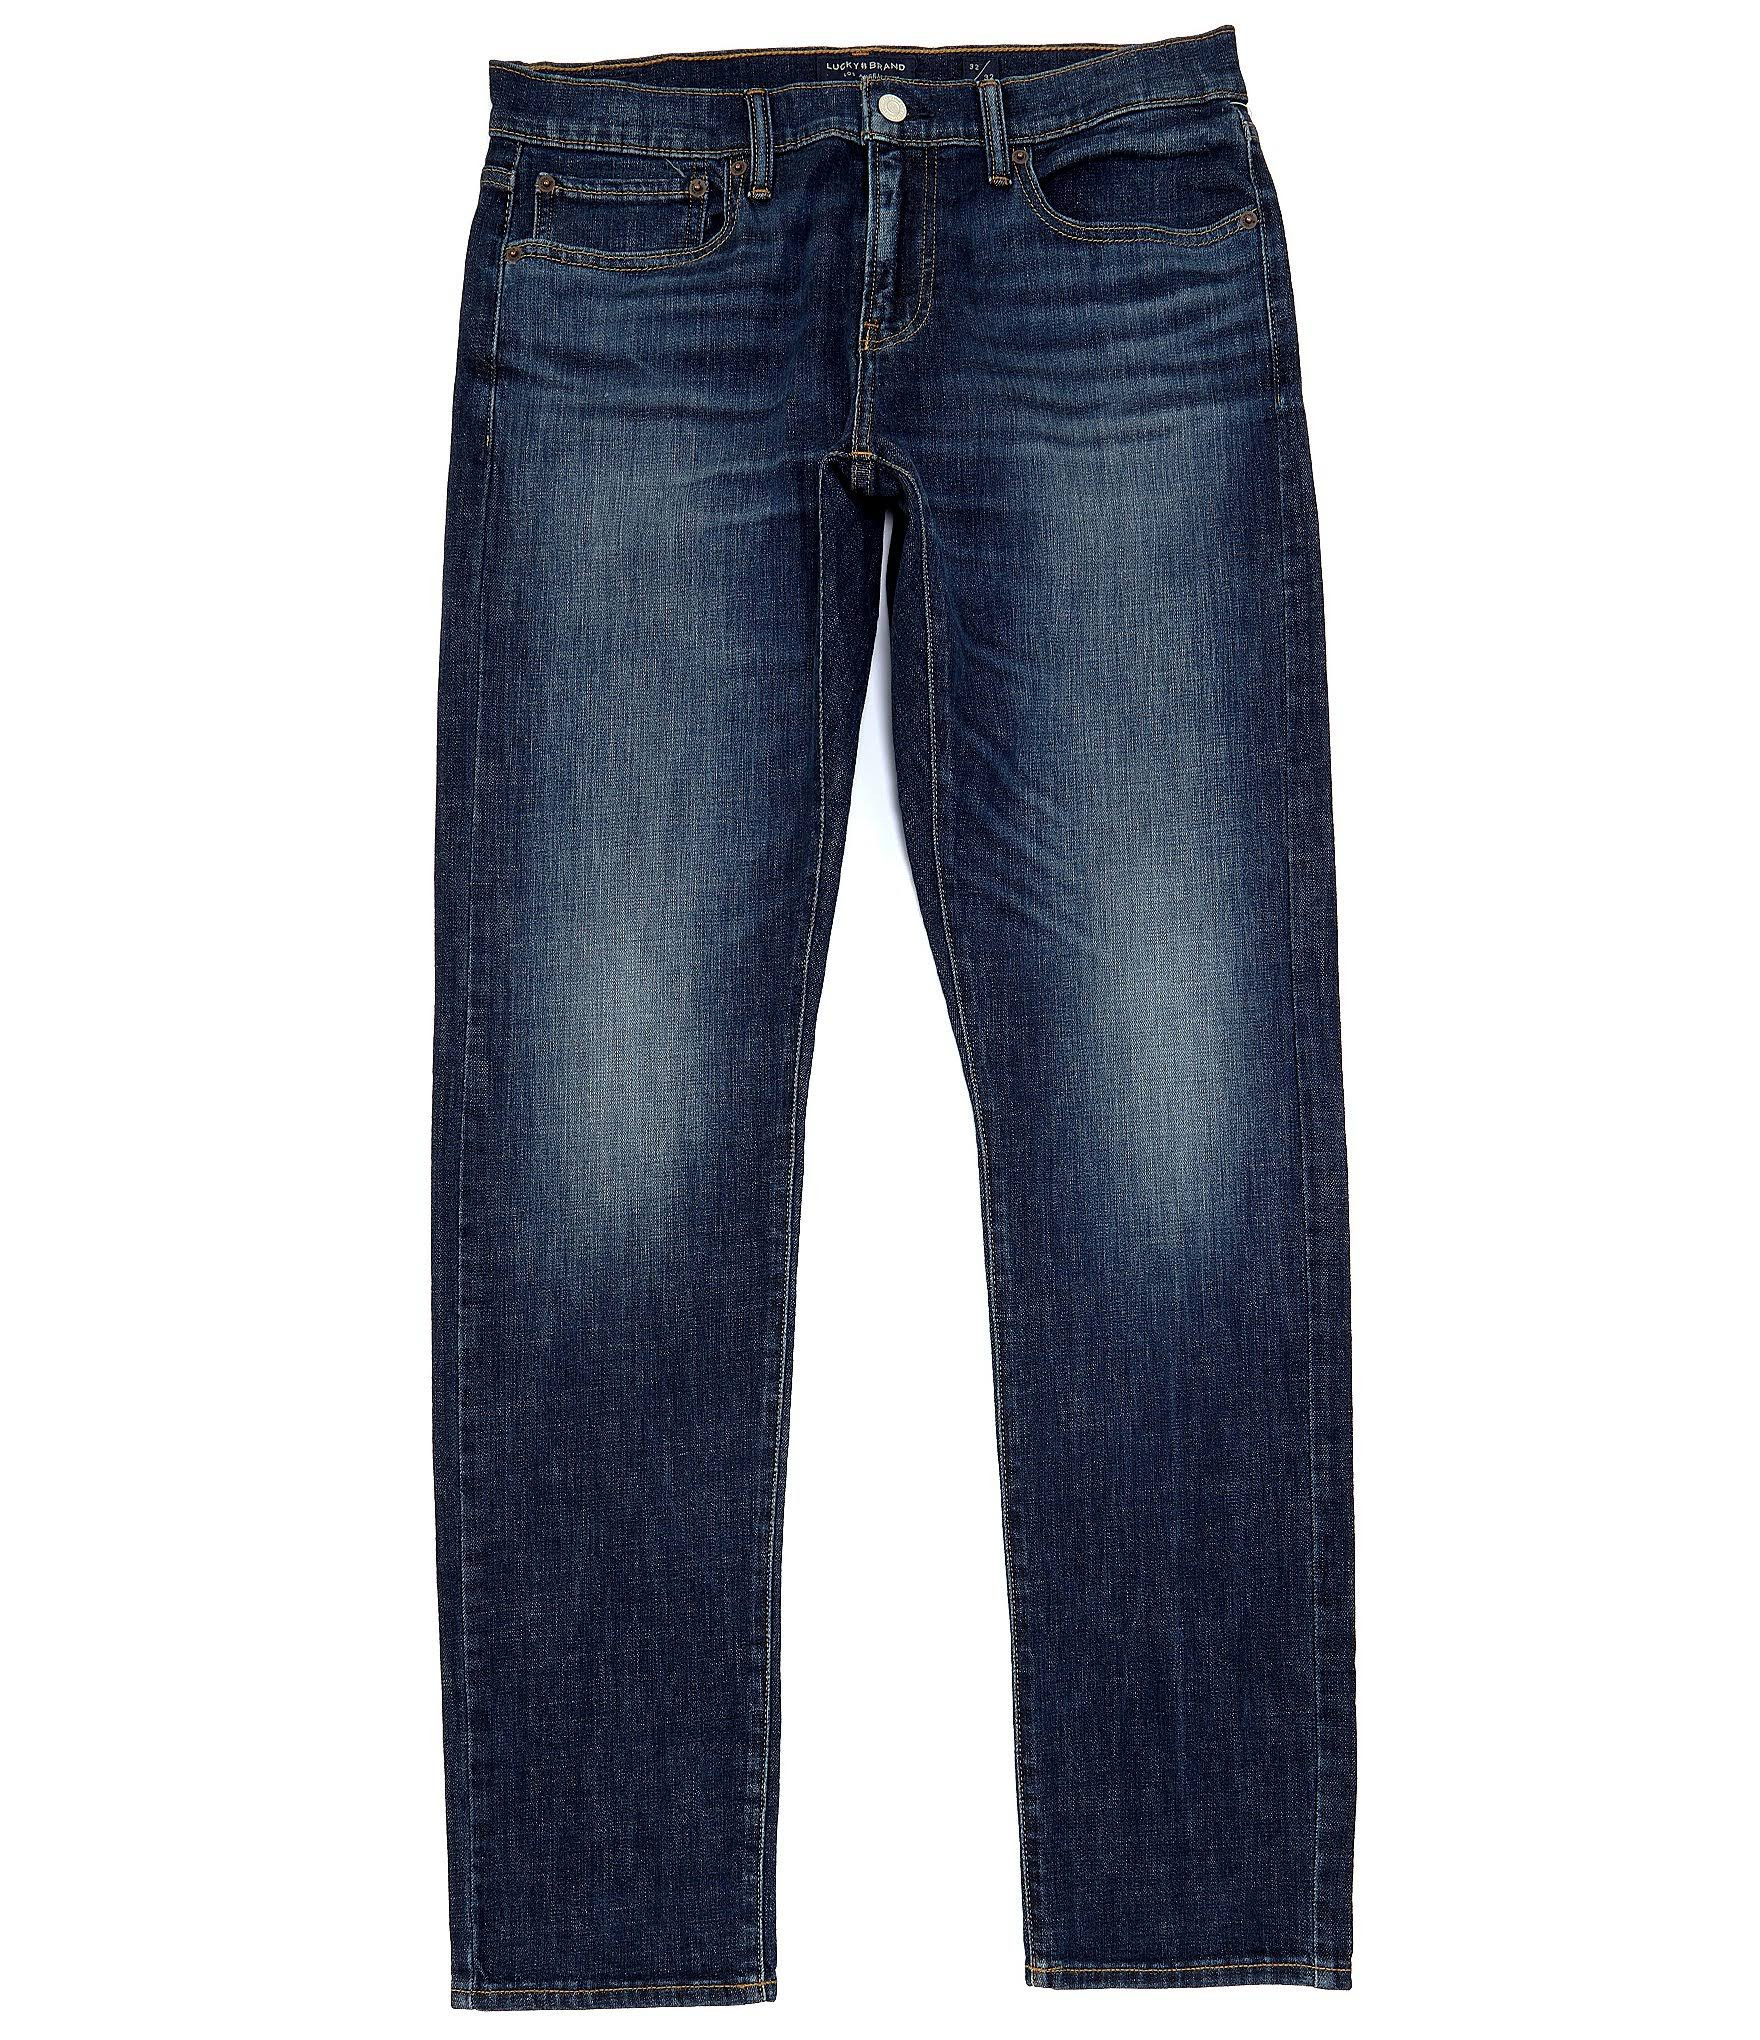 Lucky Brand 110 Slim Fit Jeans - 42 32 - Thefalconwears